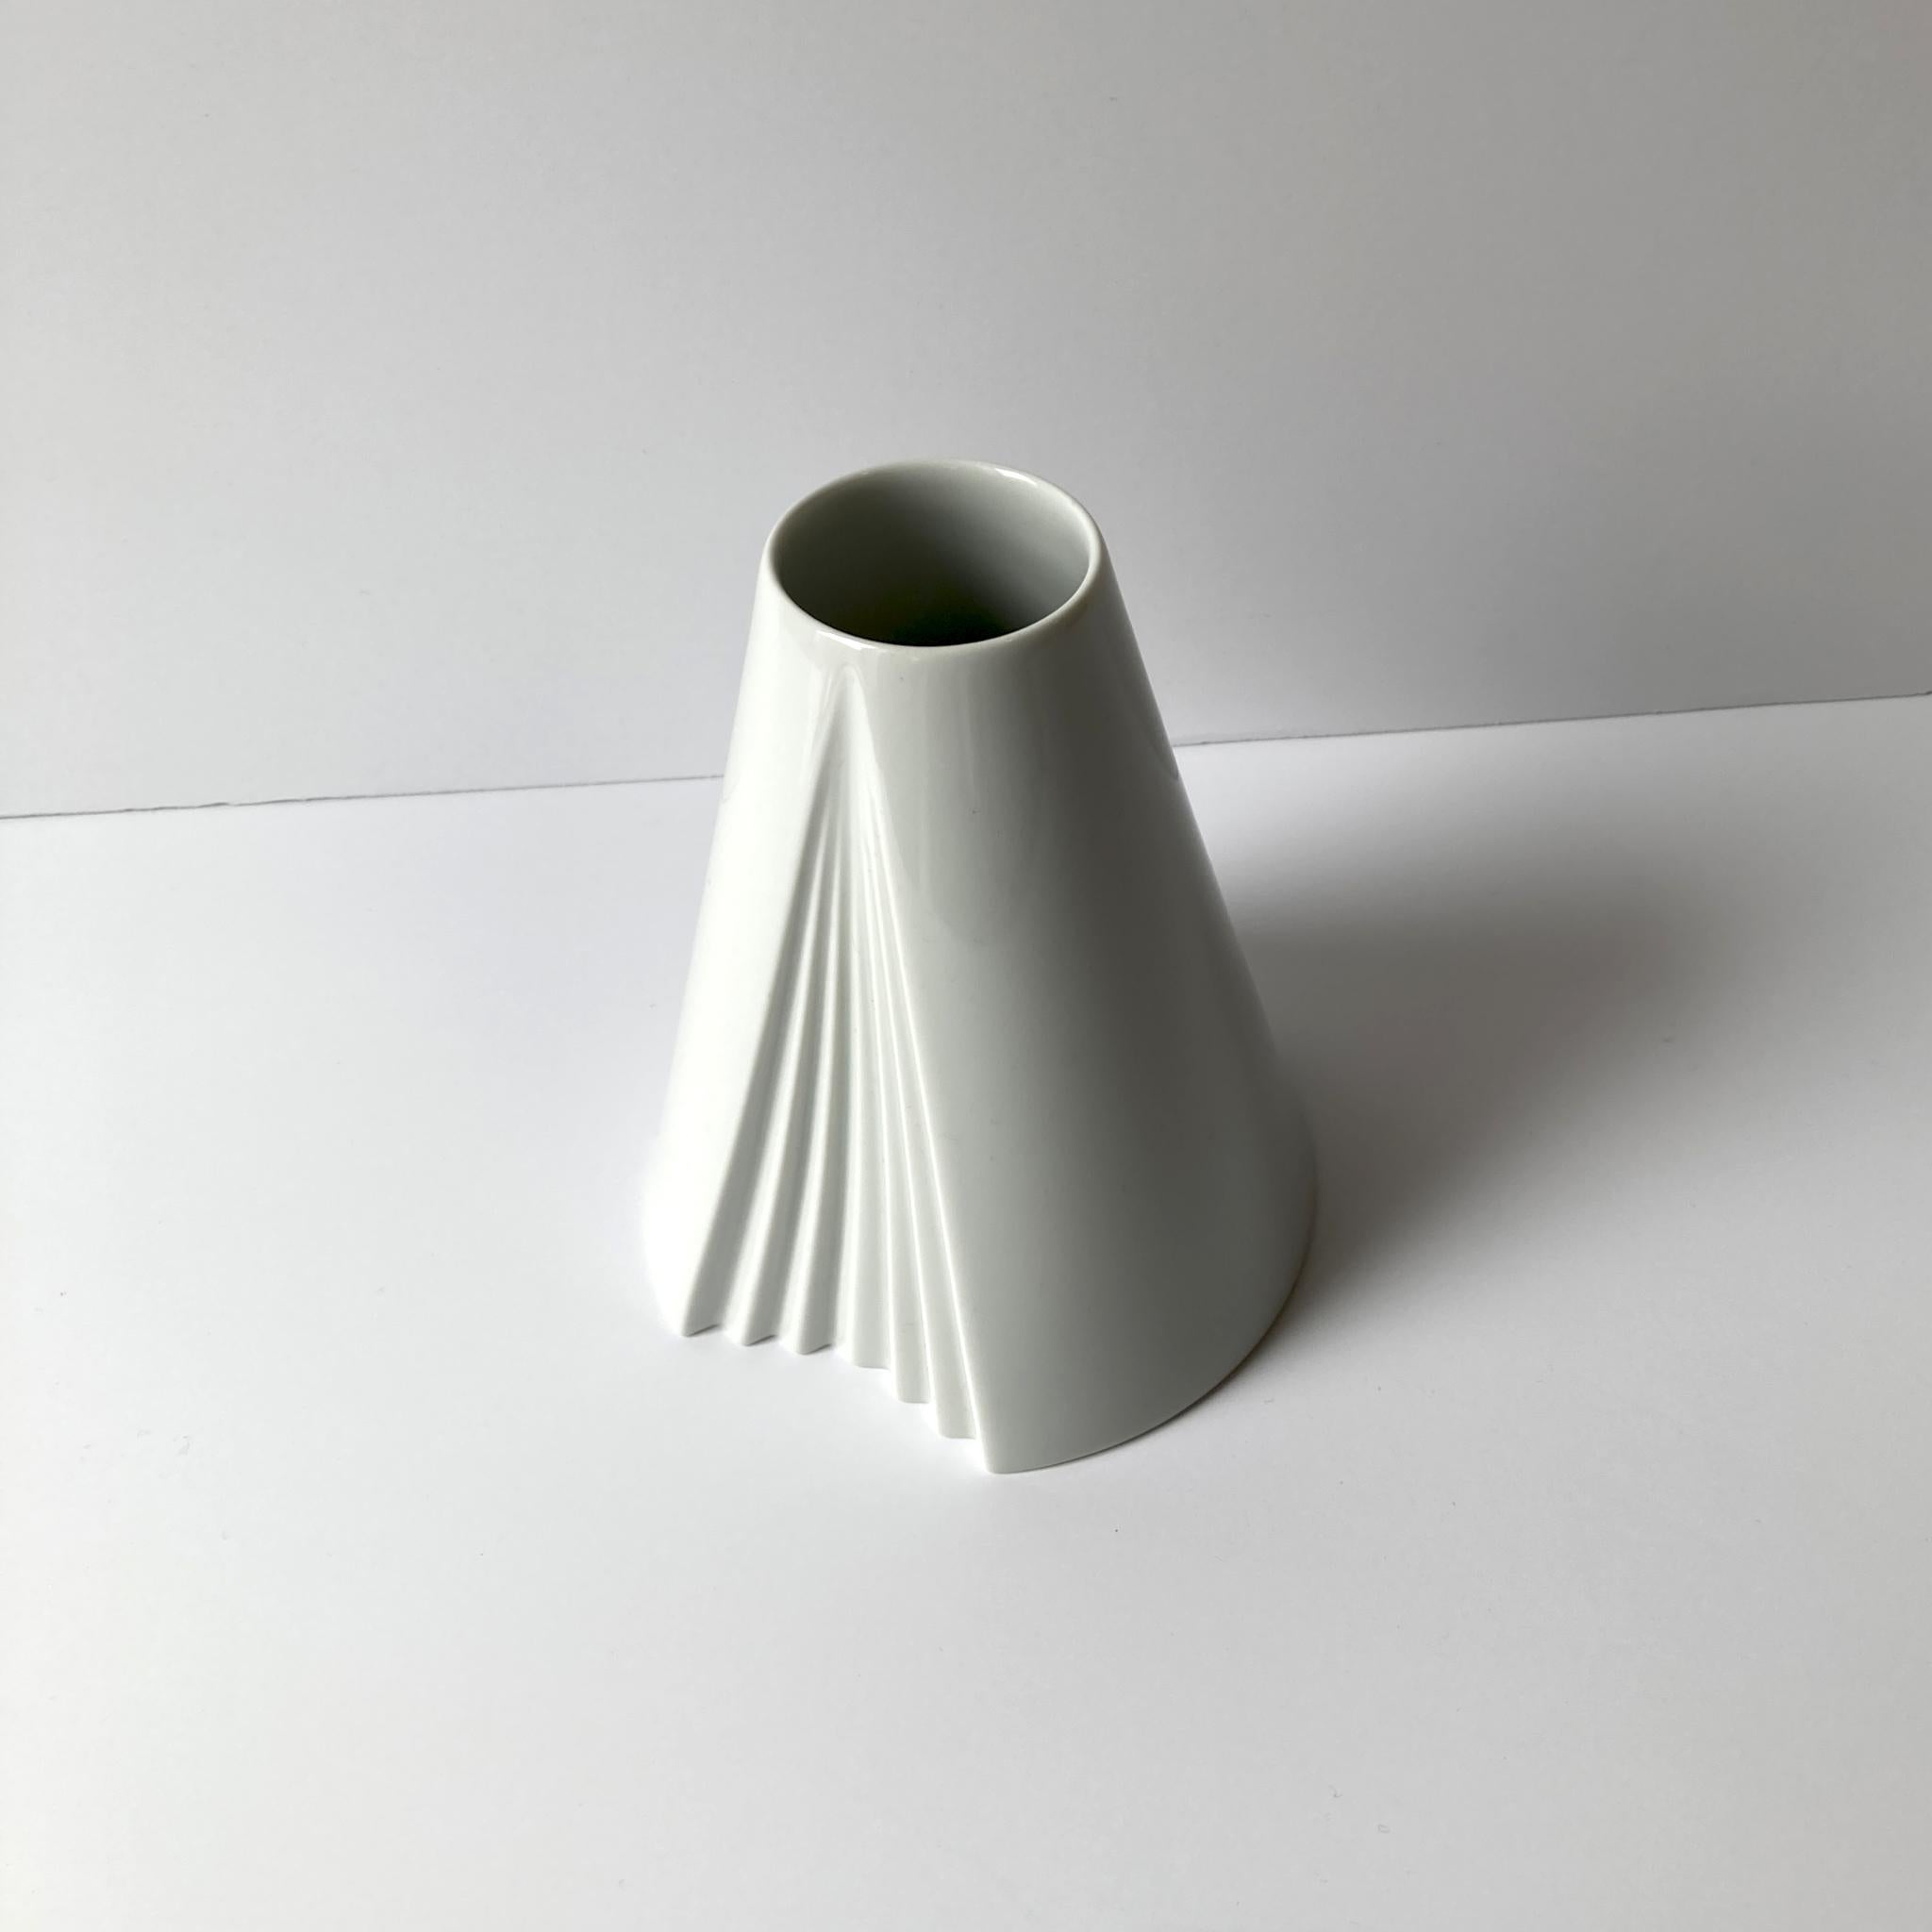 Rosenthal and Thomas Keramik White Porcelain Vases, Pair of Two In Good Condition For Sale In New York, NY